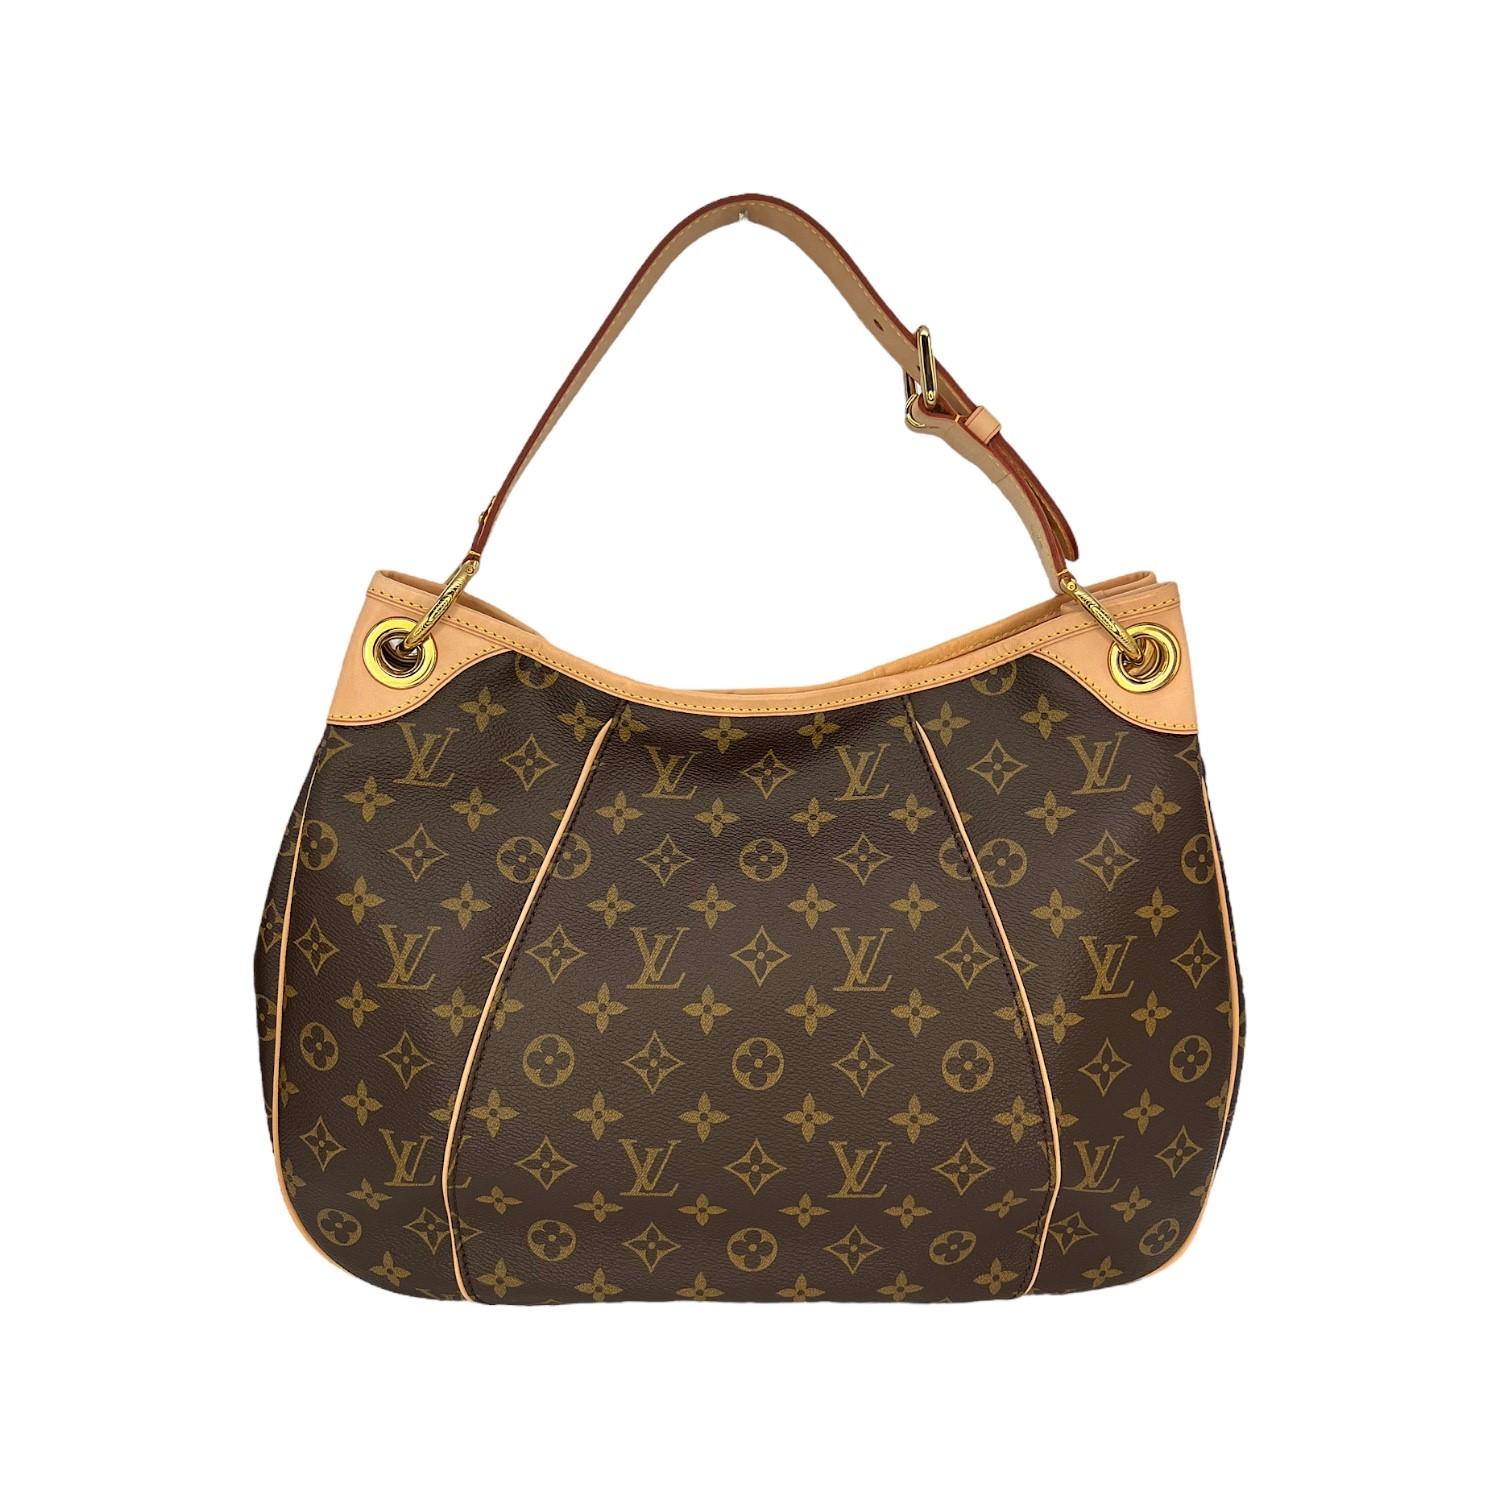 This Louis Vuitton Galleria PM was made in the USA and it is finely crafted of the Louis Vuitton Monogram coated canvas with leather trimming and gold-tone hardware features. It features a magnetic snap closure that opens up to a beige Alcantara